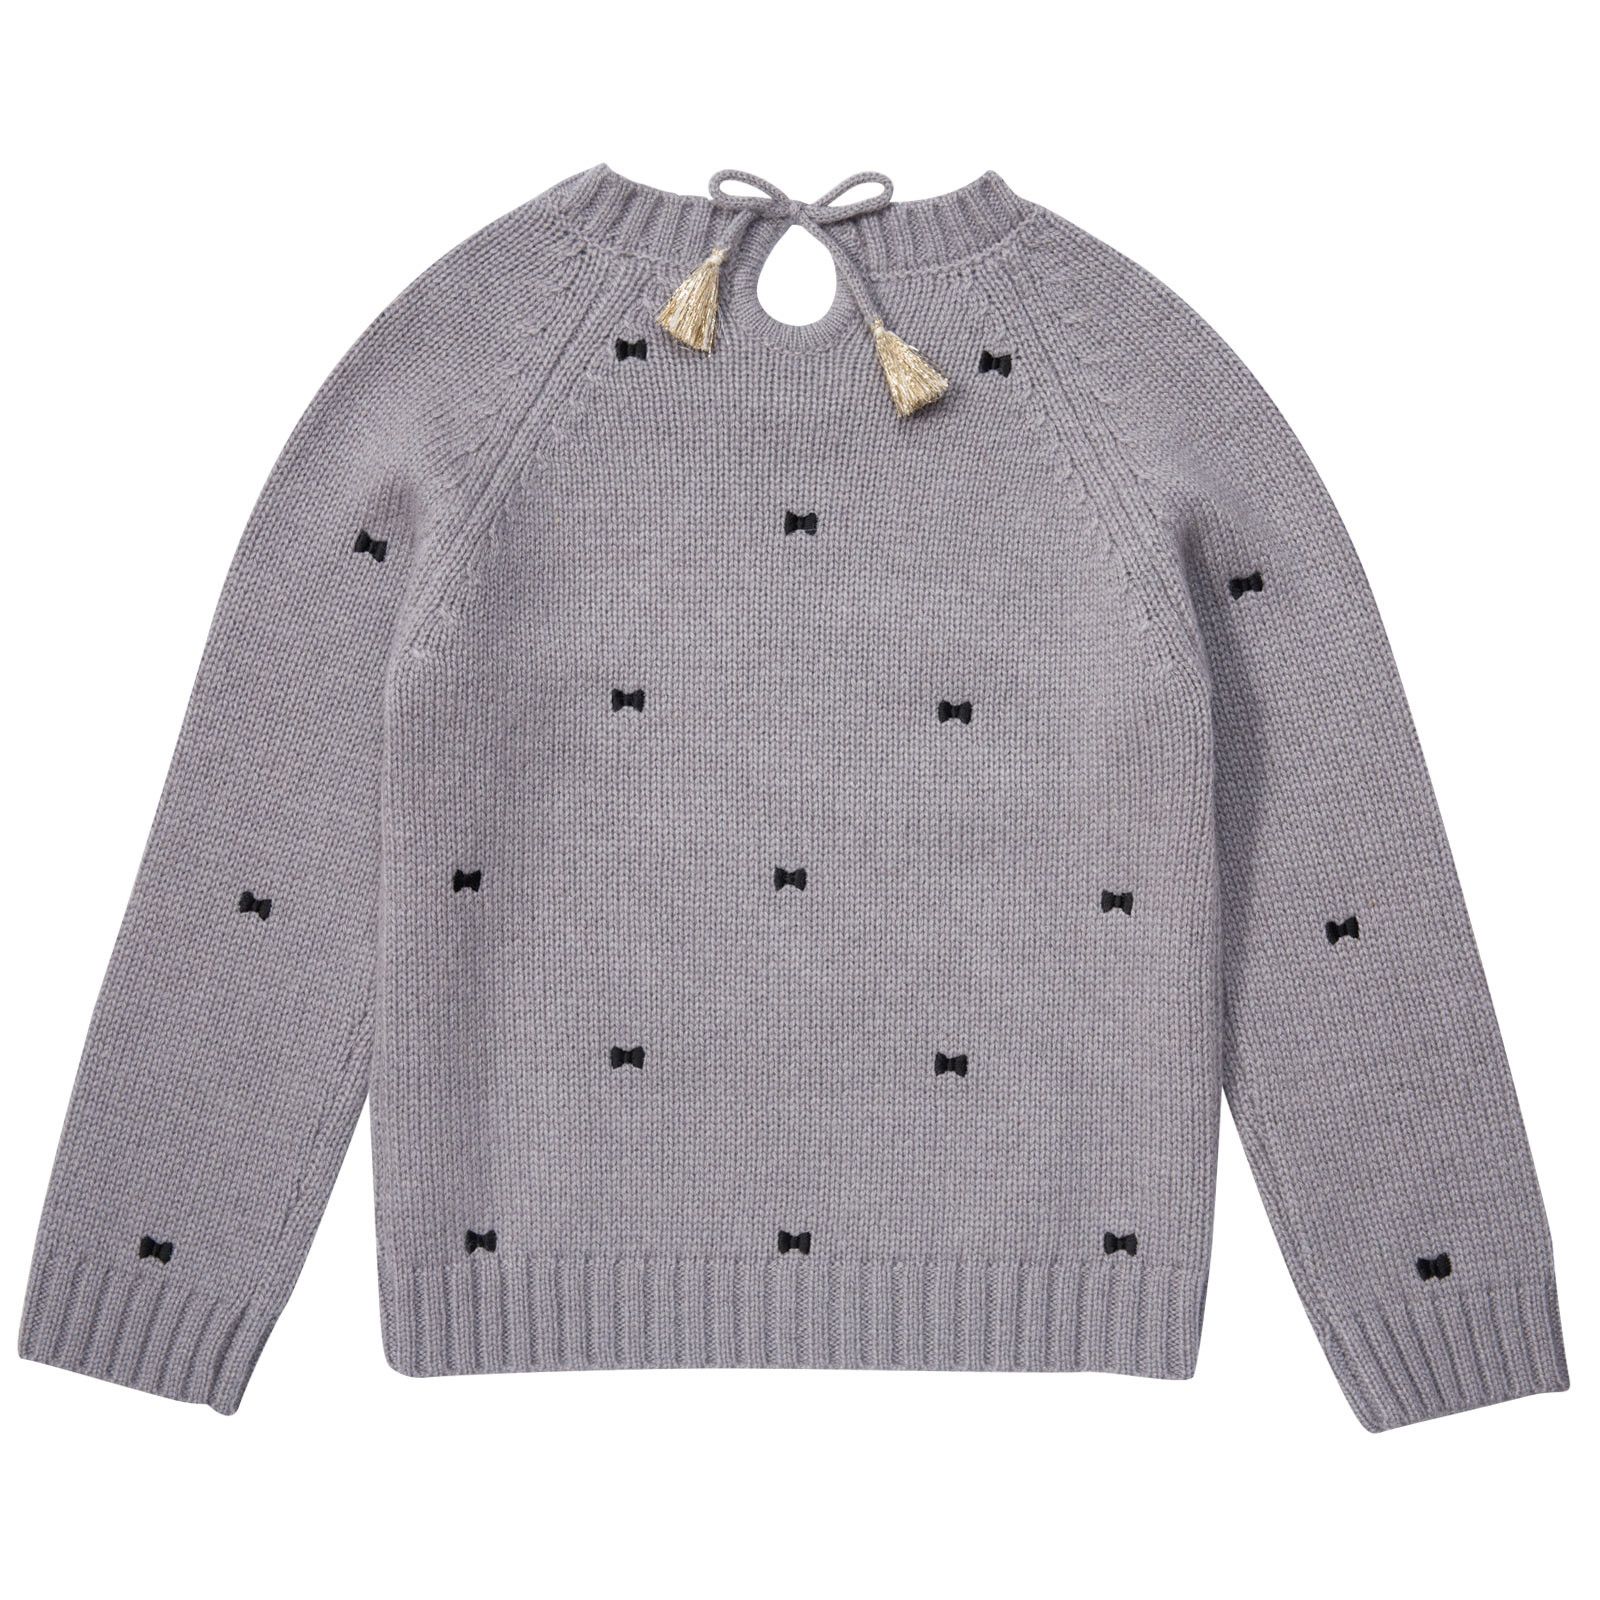 Girls Grey Embroidered Bows Sweater - CÉMAROSE | Children's Fashion Store - 2